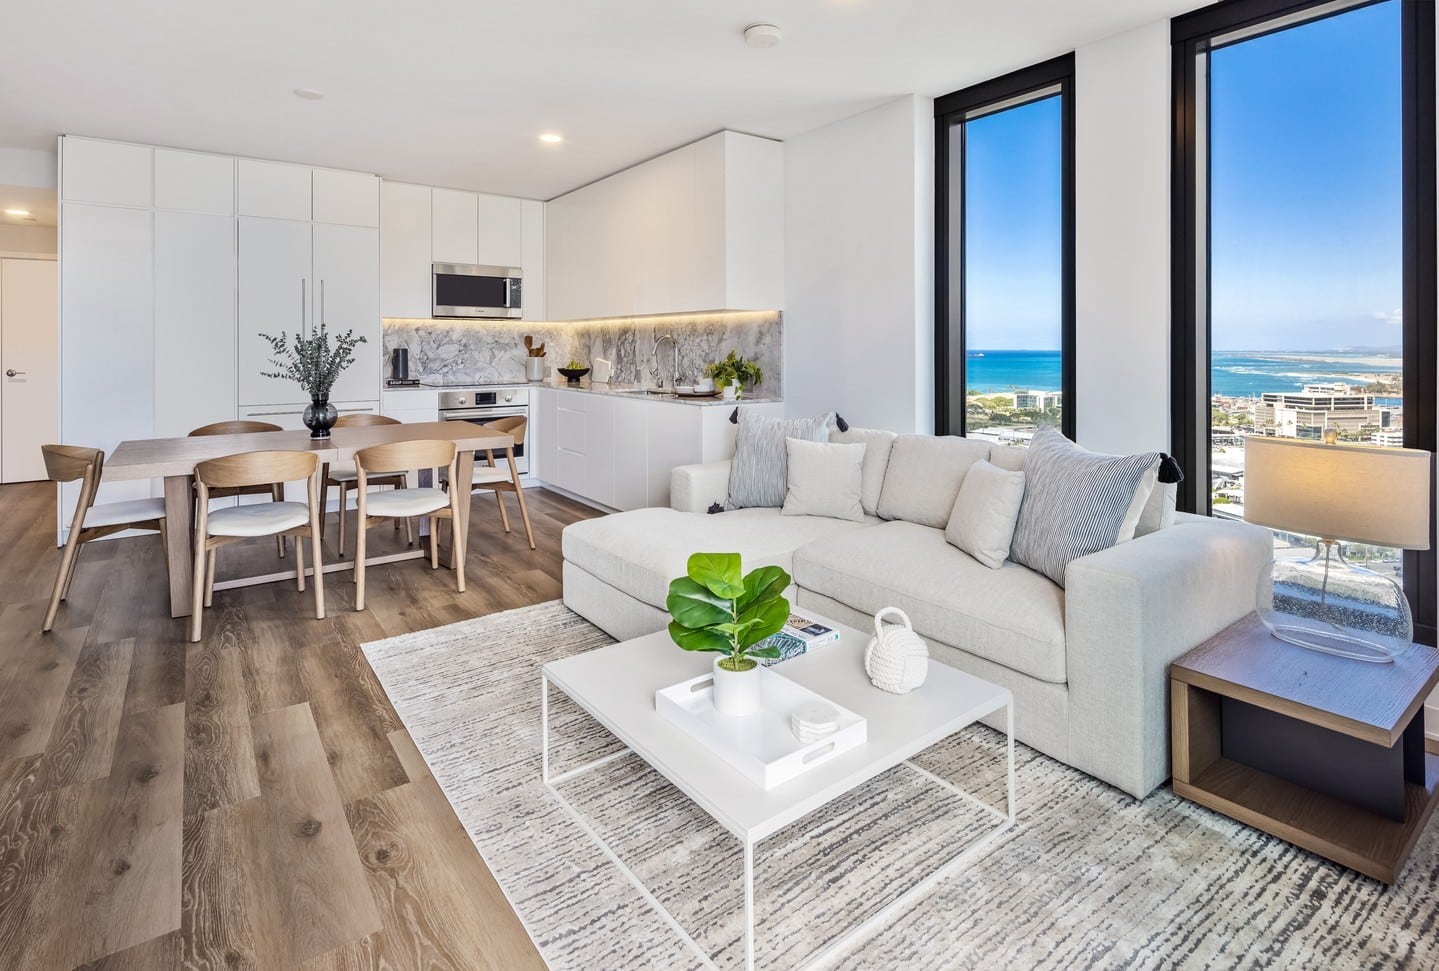 At ‘A’ali’i, enjoy the comfort of island living with modern, well-designed residences and amenities that cater to how we live today. Learn more about these move-in-ready homes at the link in our bio.